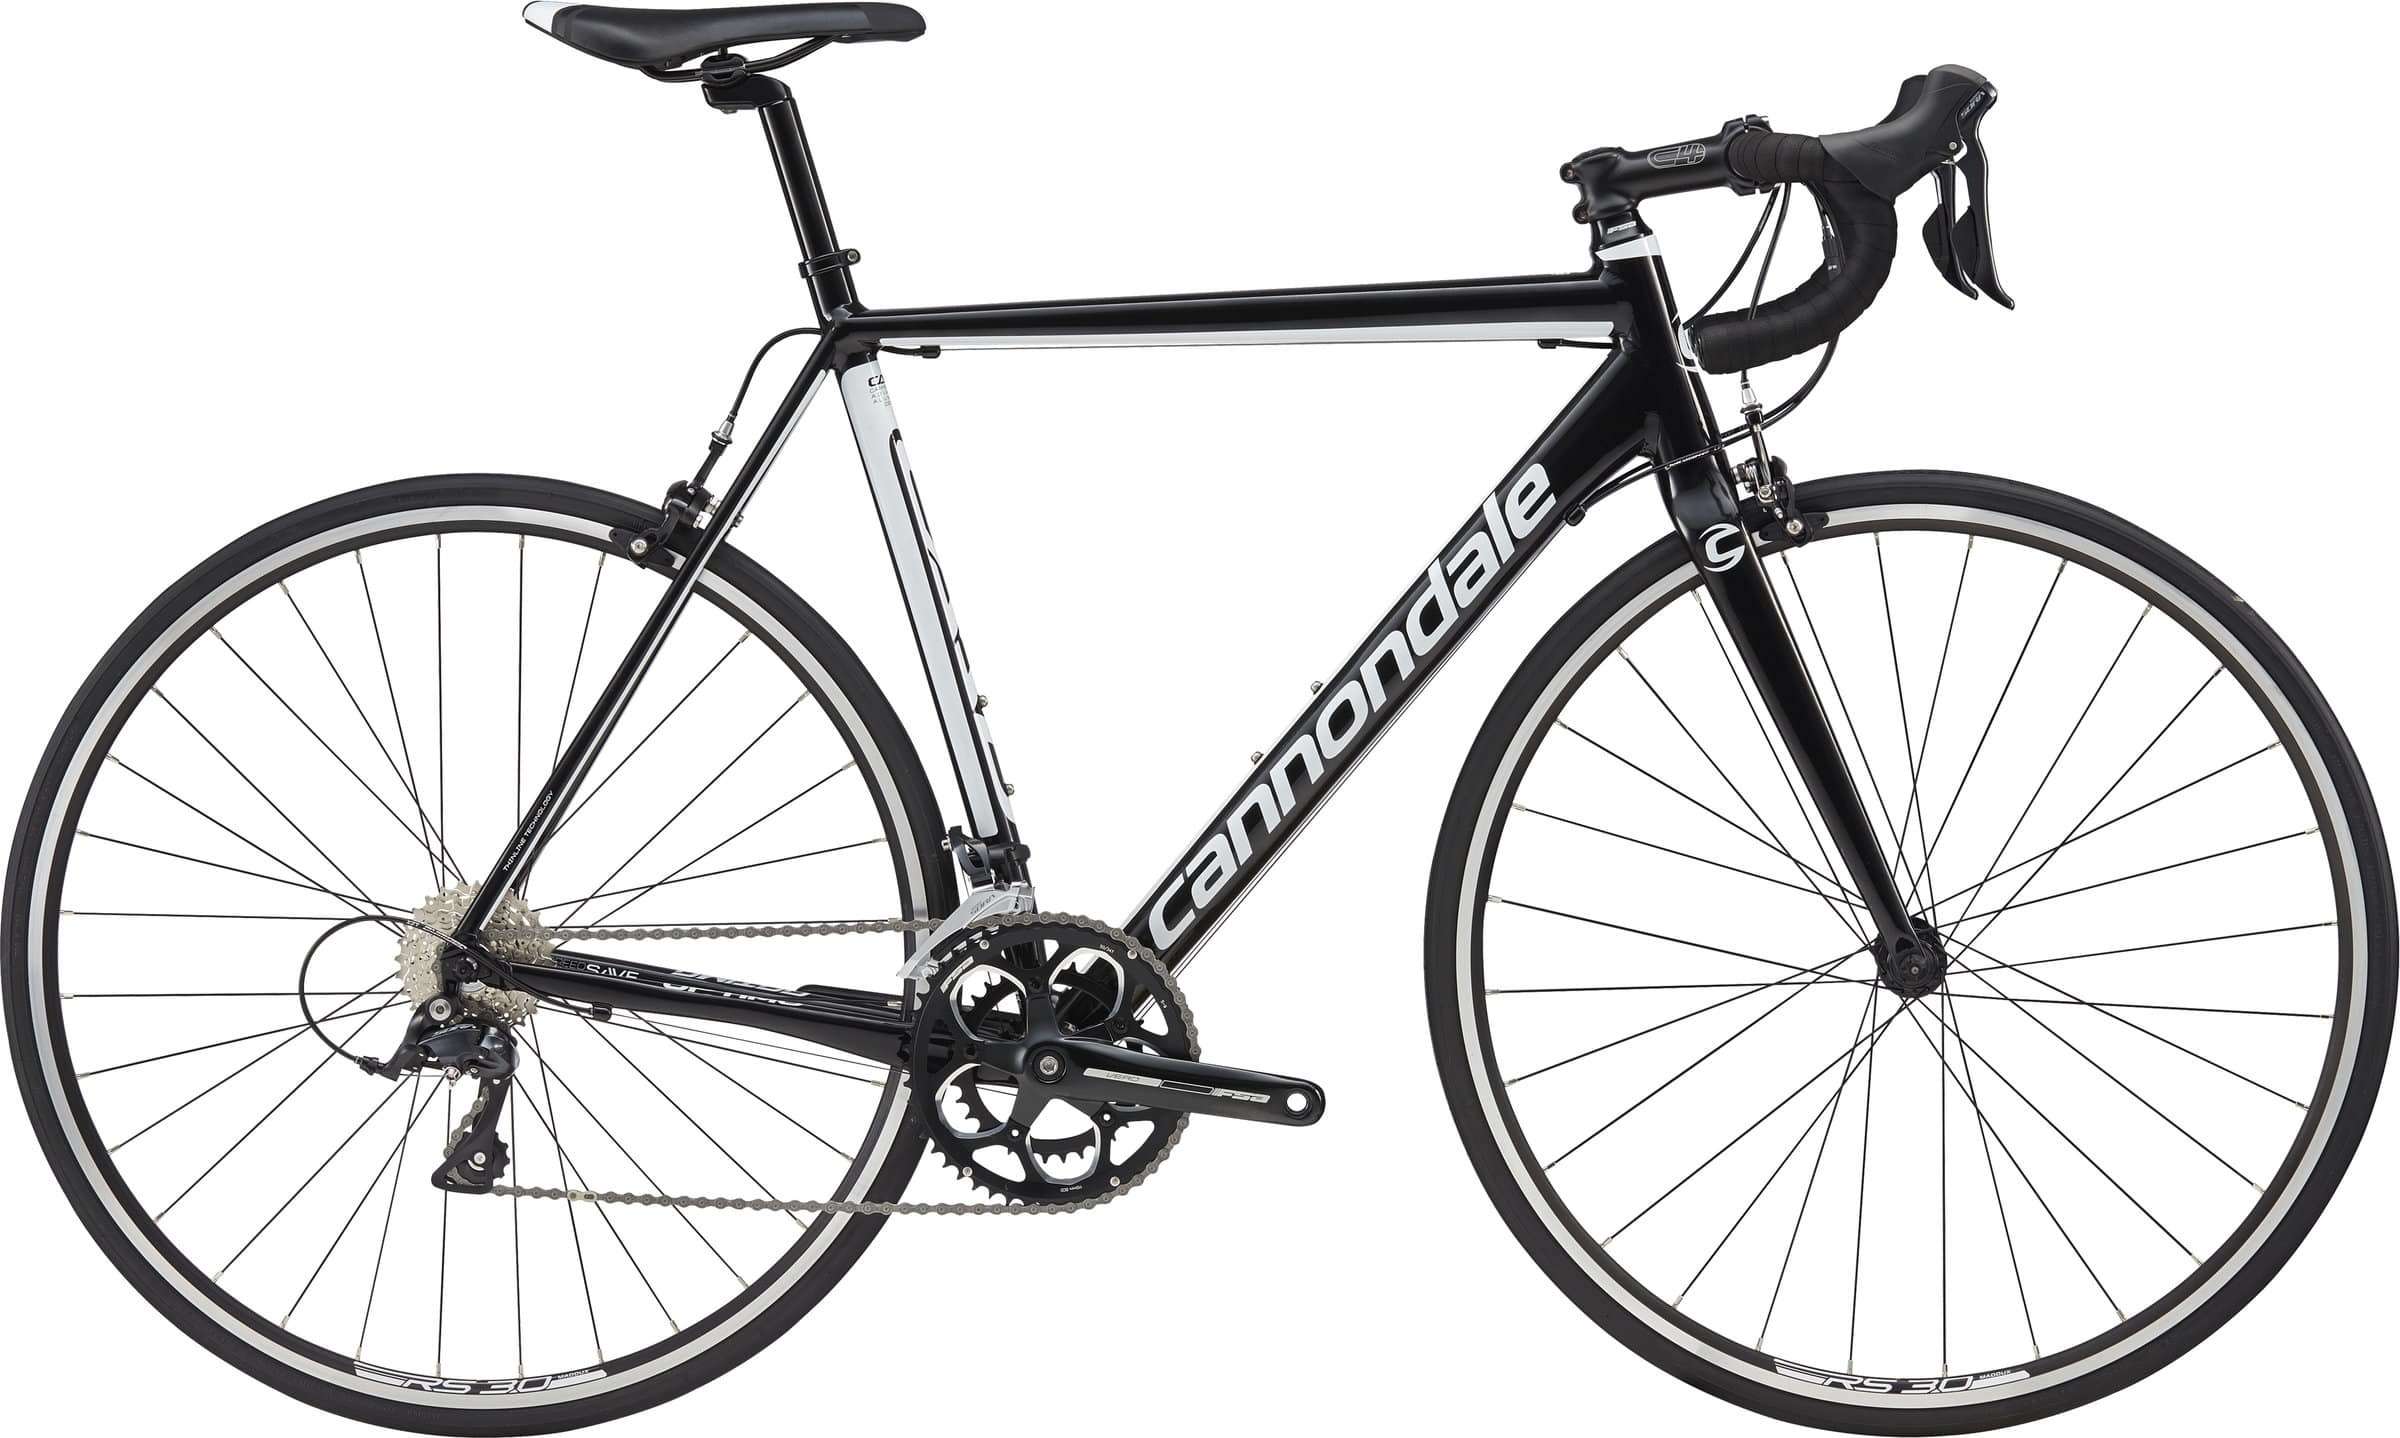 Information about Road bikes and differences among subcategories